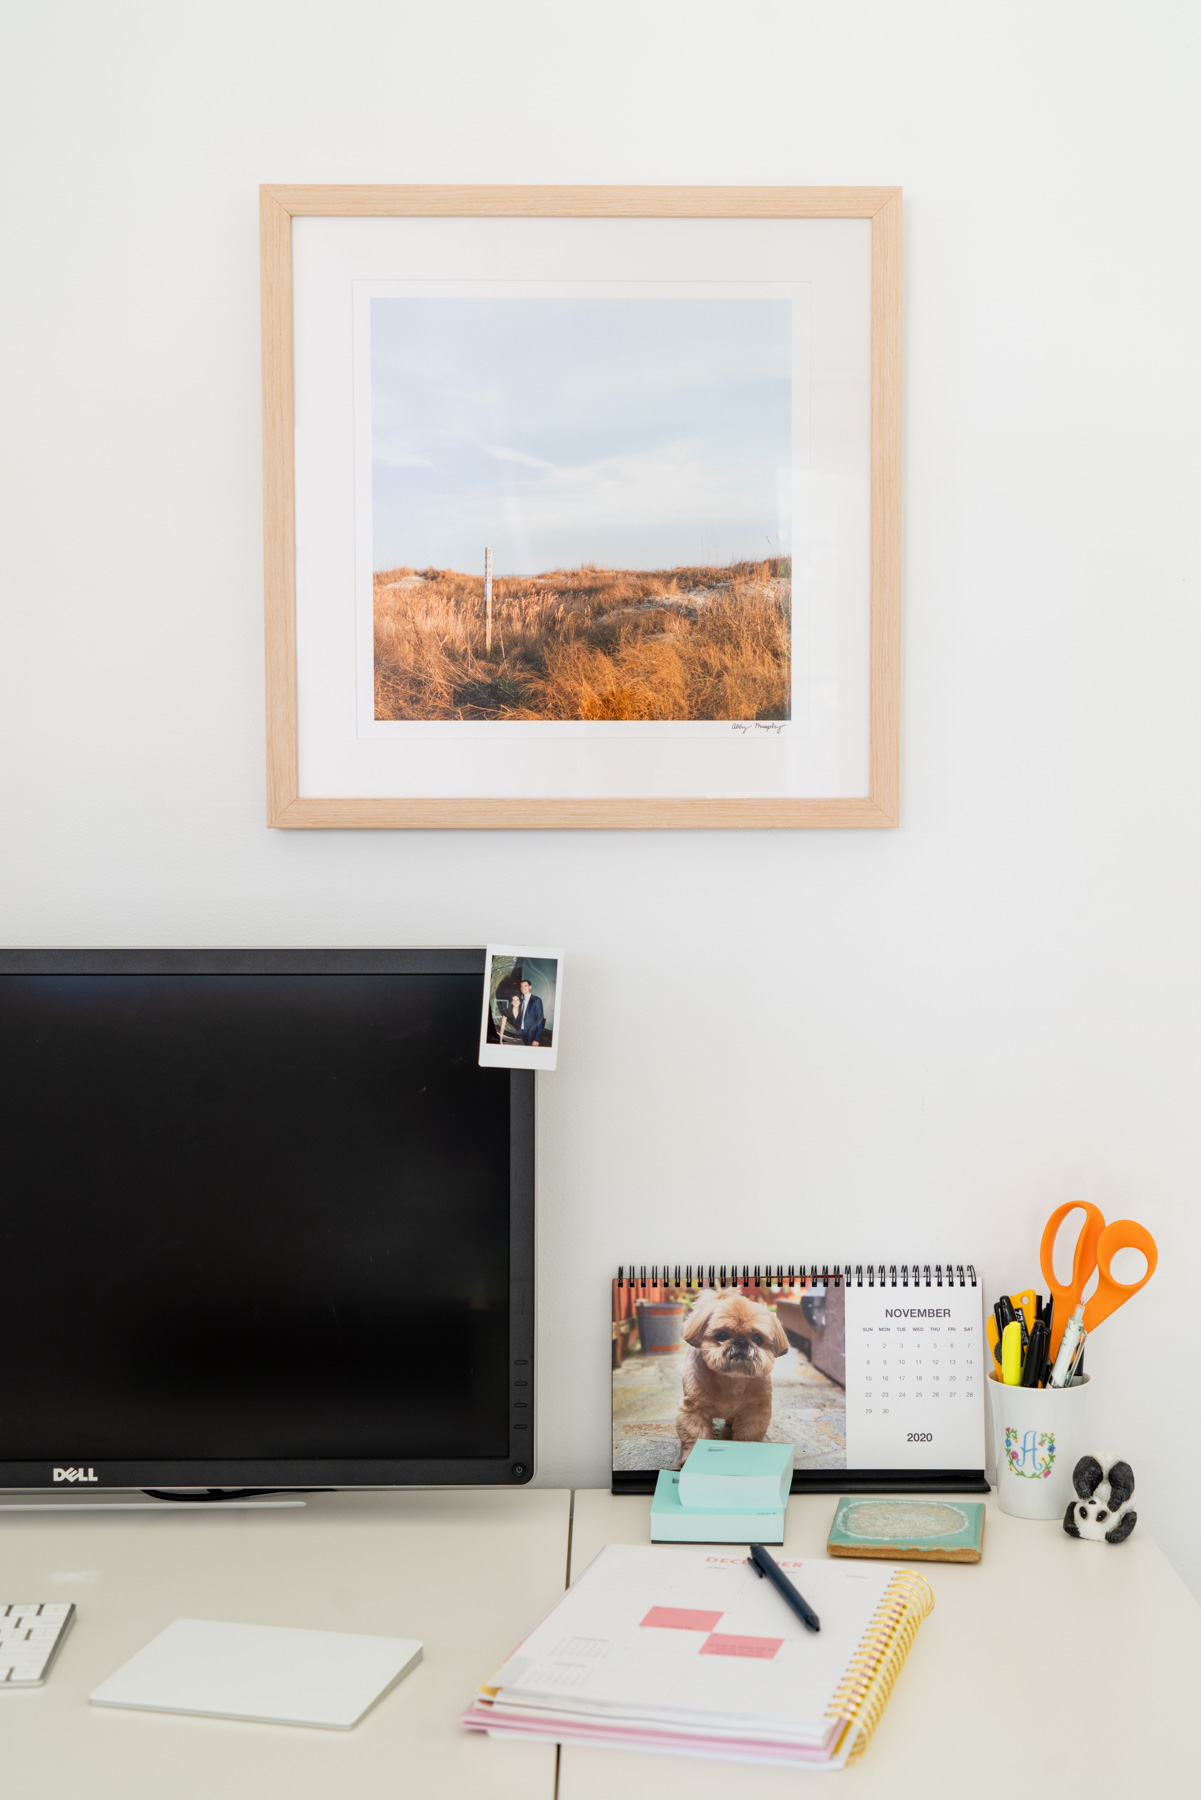 A framed photograph of a beach station in Sullivan's Island, South Carolina hanging on the wall above a desk